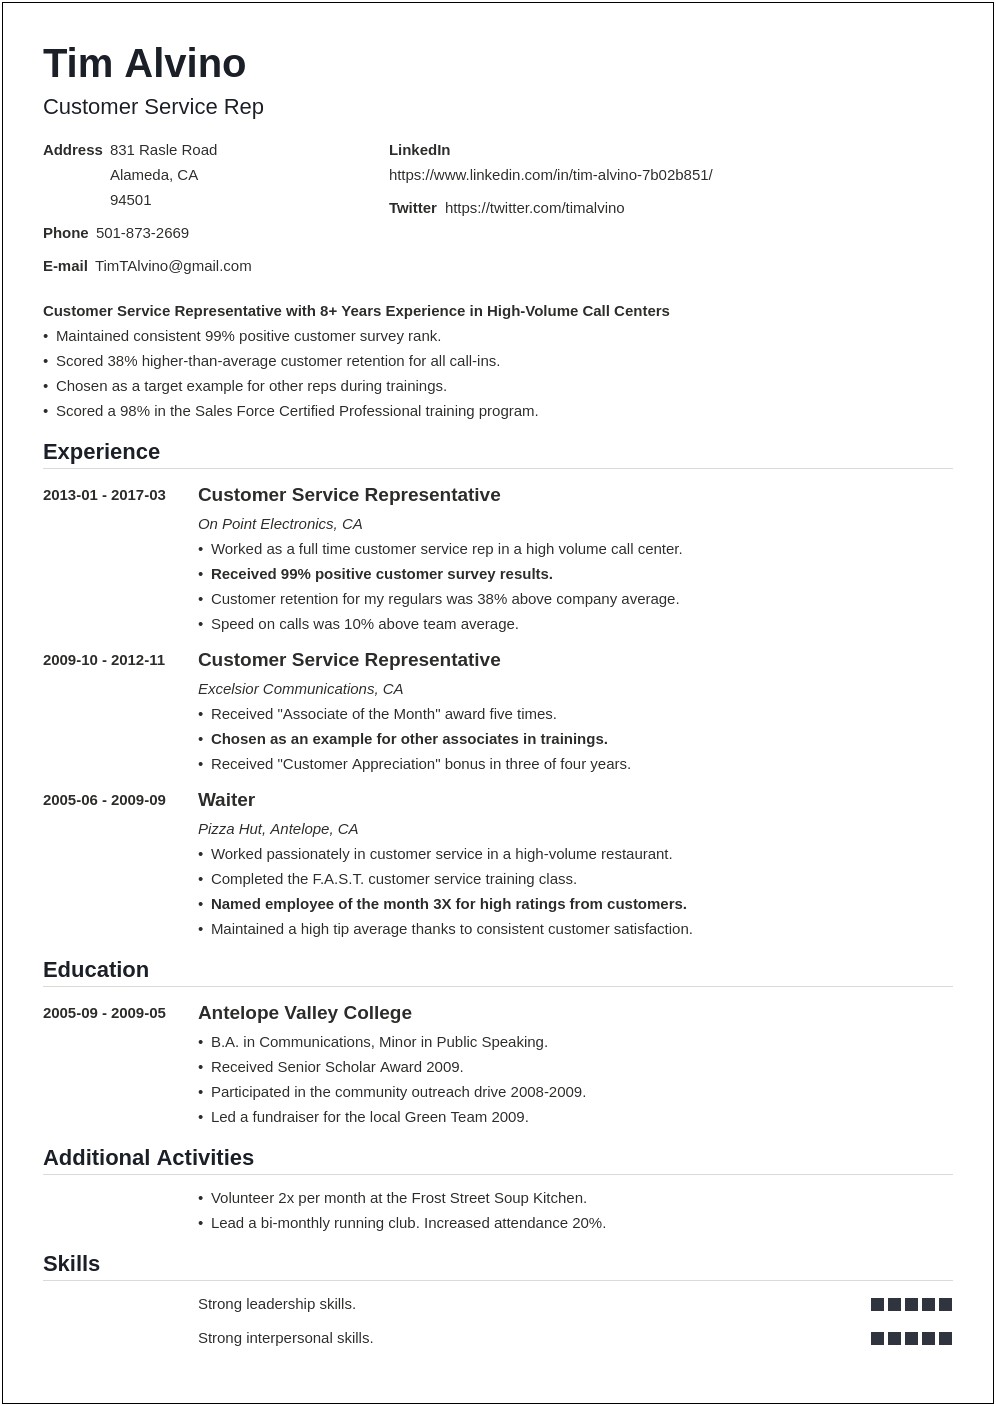 Resume Tagline Examples For Beginners